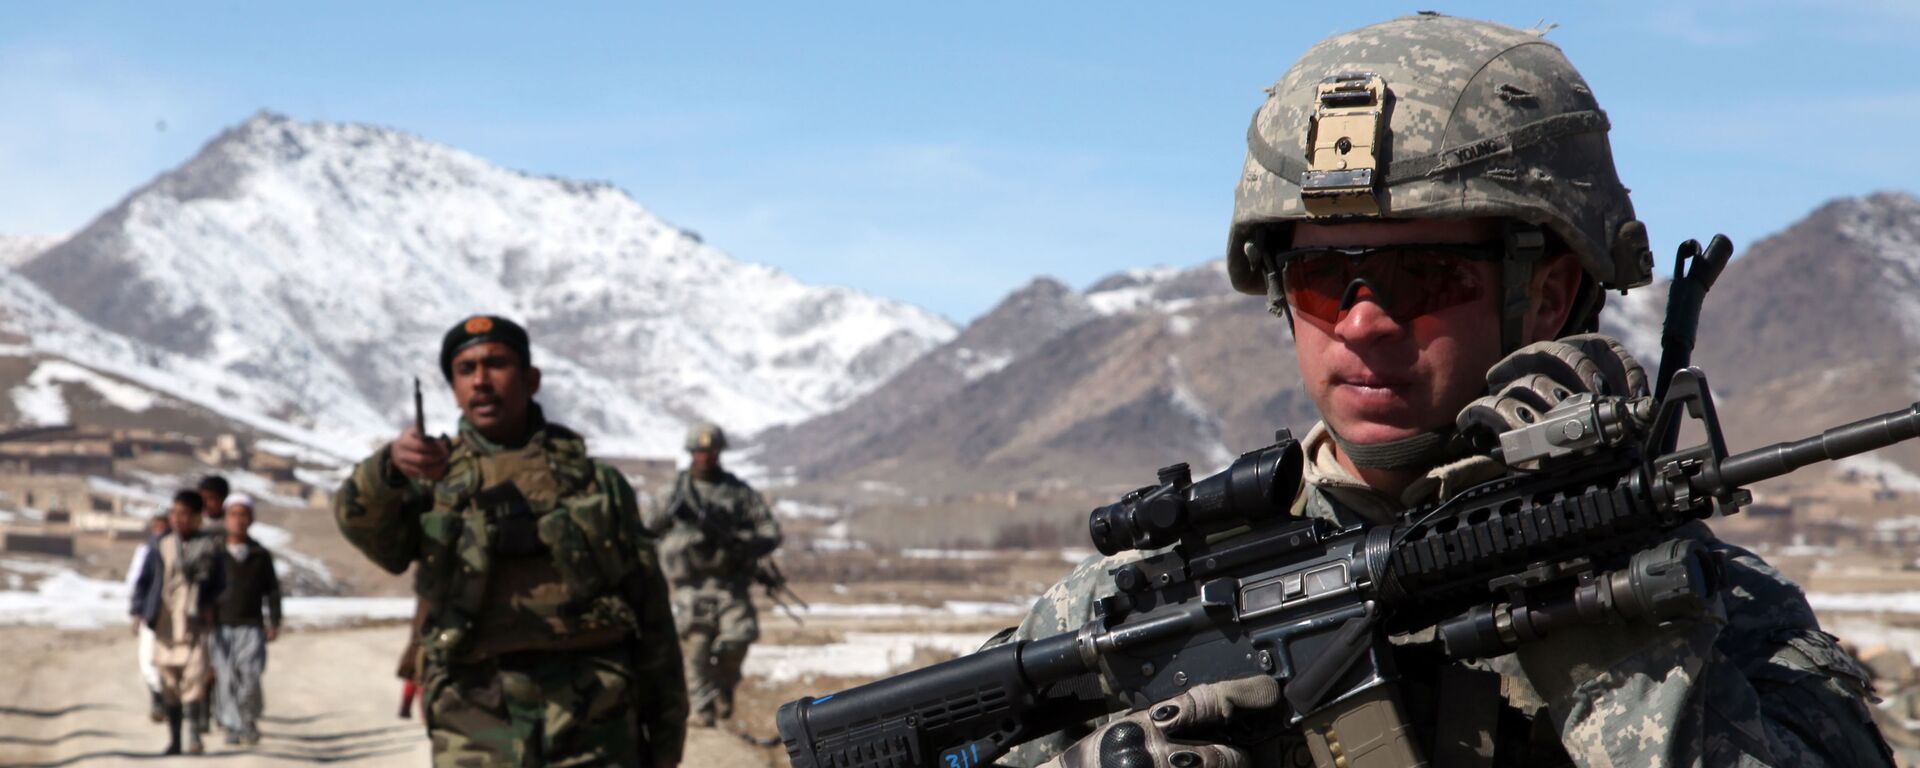 A U.S. Army Soldier from the A Company, 1-503rd Battalion, 173rd Airborne Brigade Combat Team, conducts a patrol with a platoon of Afghan national army soldiers to check on conditions in the village of Yawez, Wardak province, Afghanistan, Feb. 17, 2010.  - Sputnik International, 1920, 12.08.2022